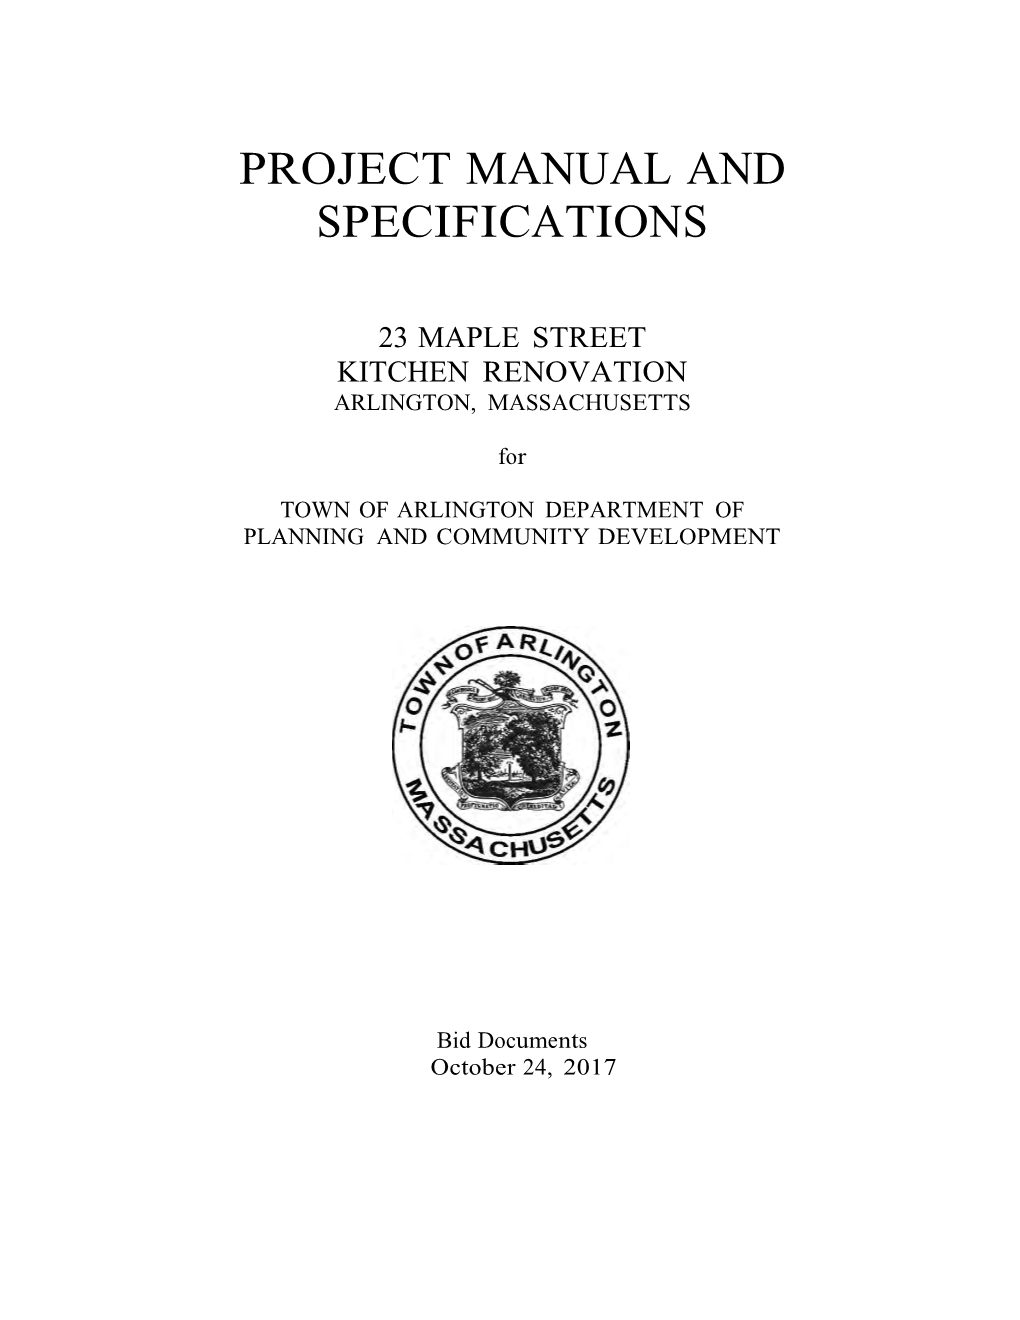 Project Manual and Specifications